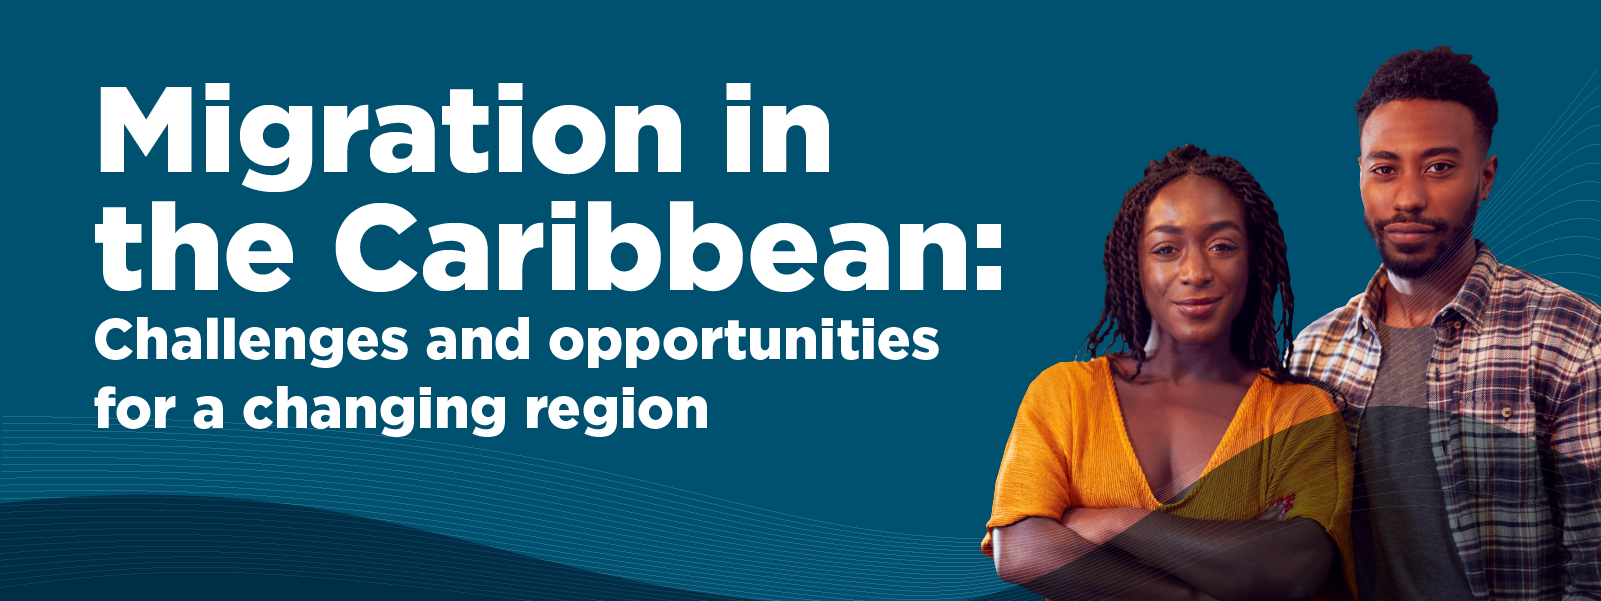 Challenges and opportunities of migration in the Caribbean